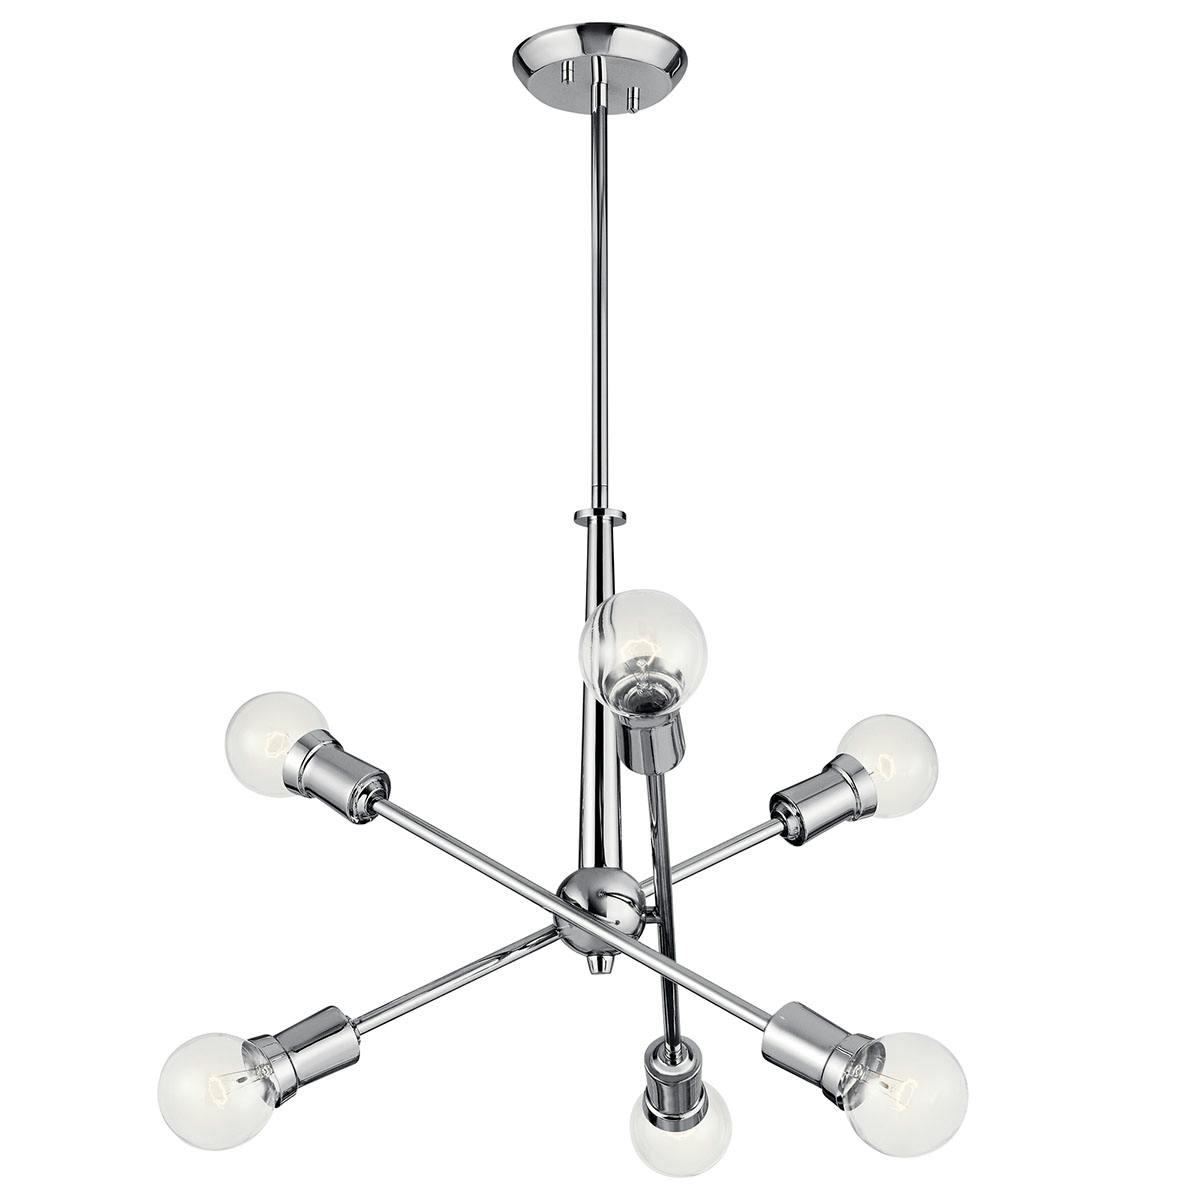 Armstrong 6 Light Chandelier Chrome on a white background